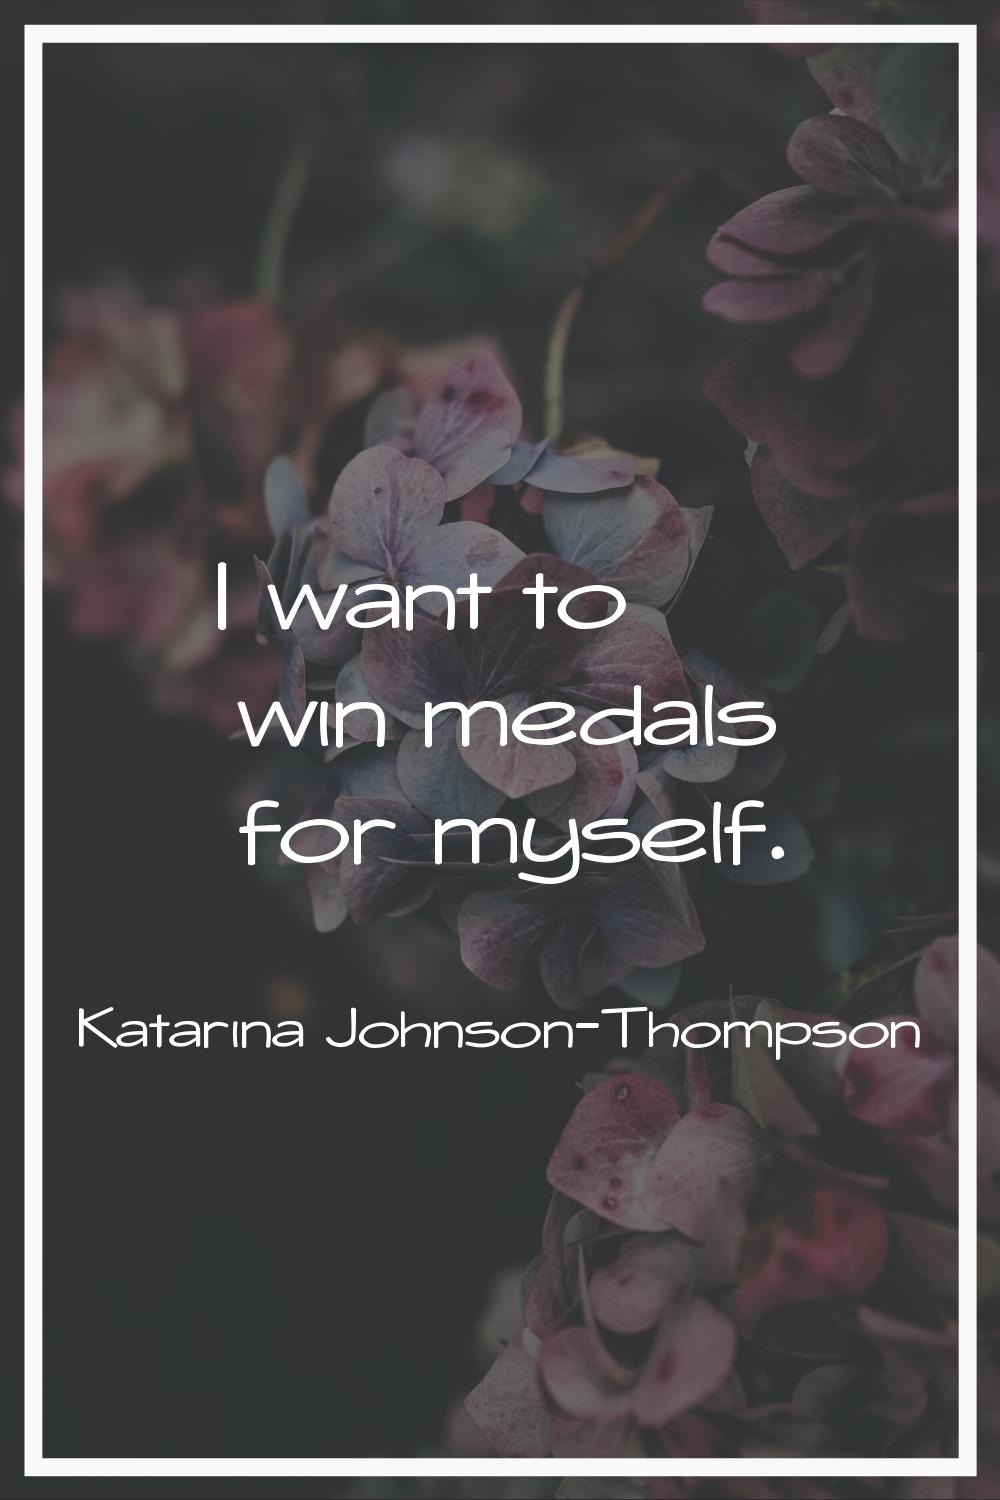 I want to win medals for myself.